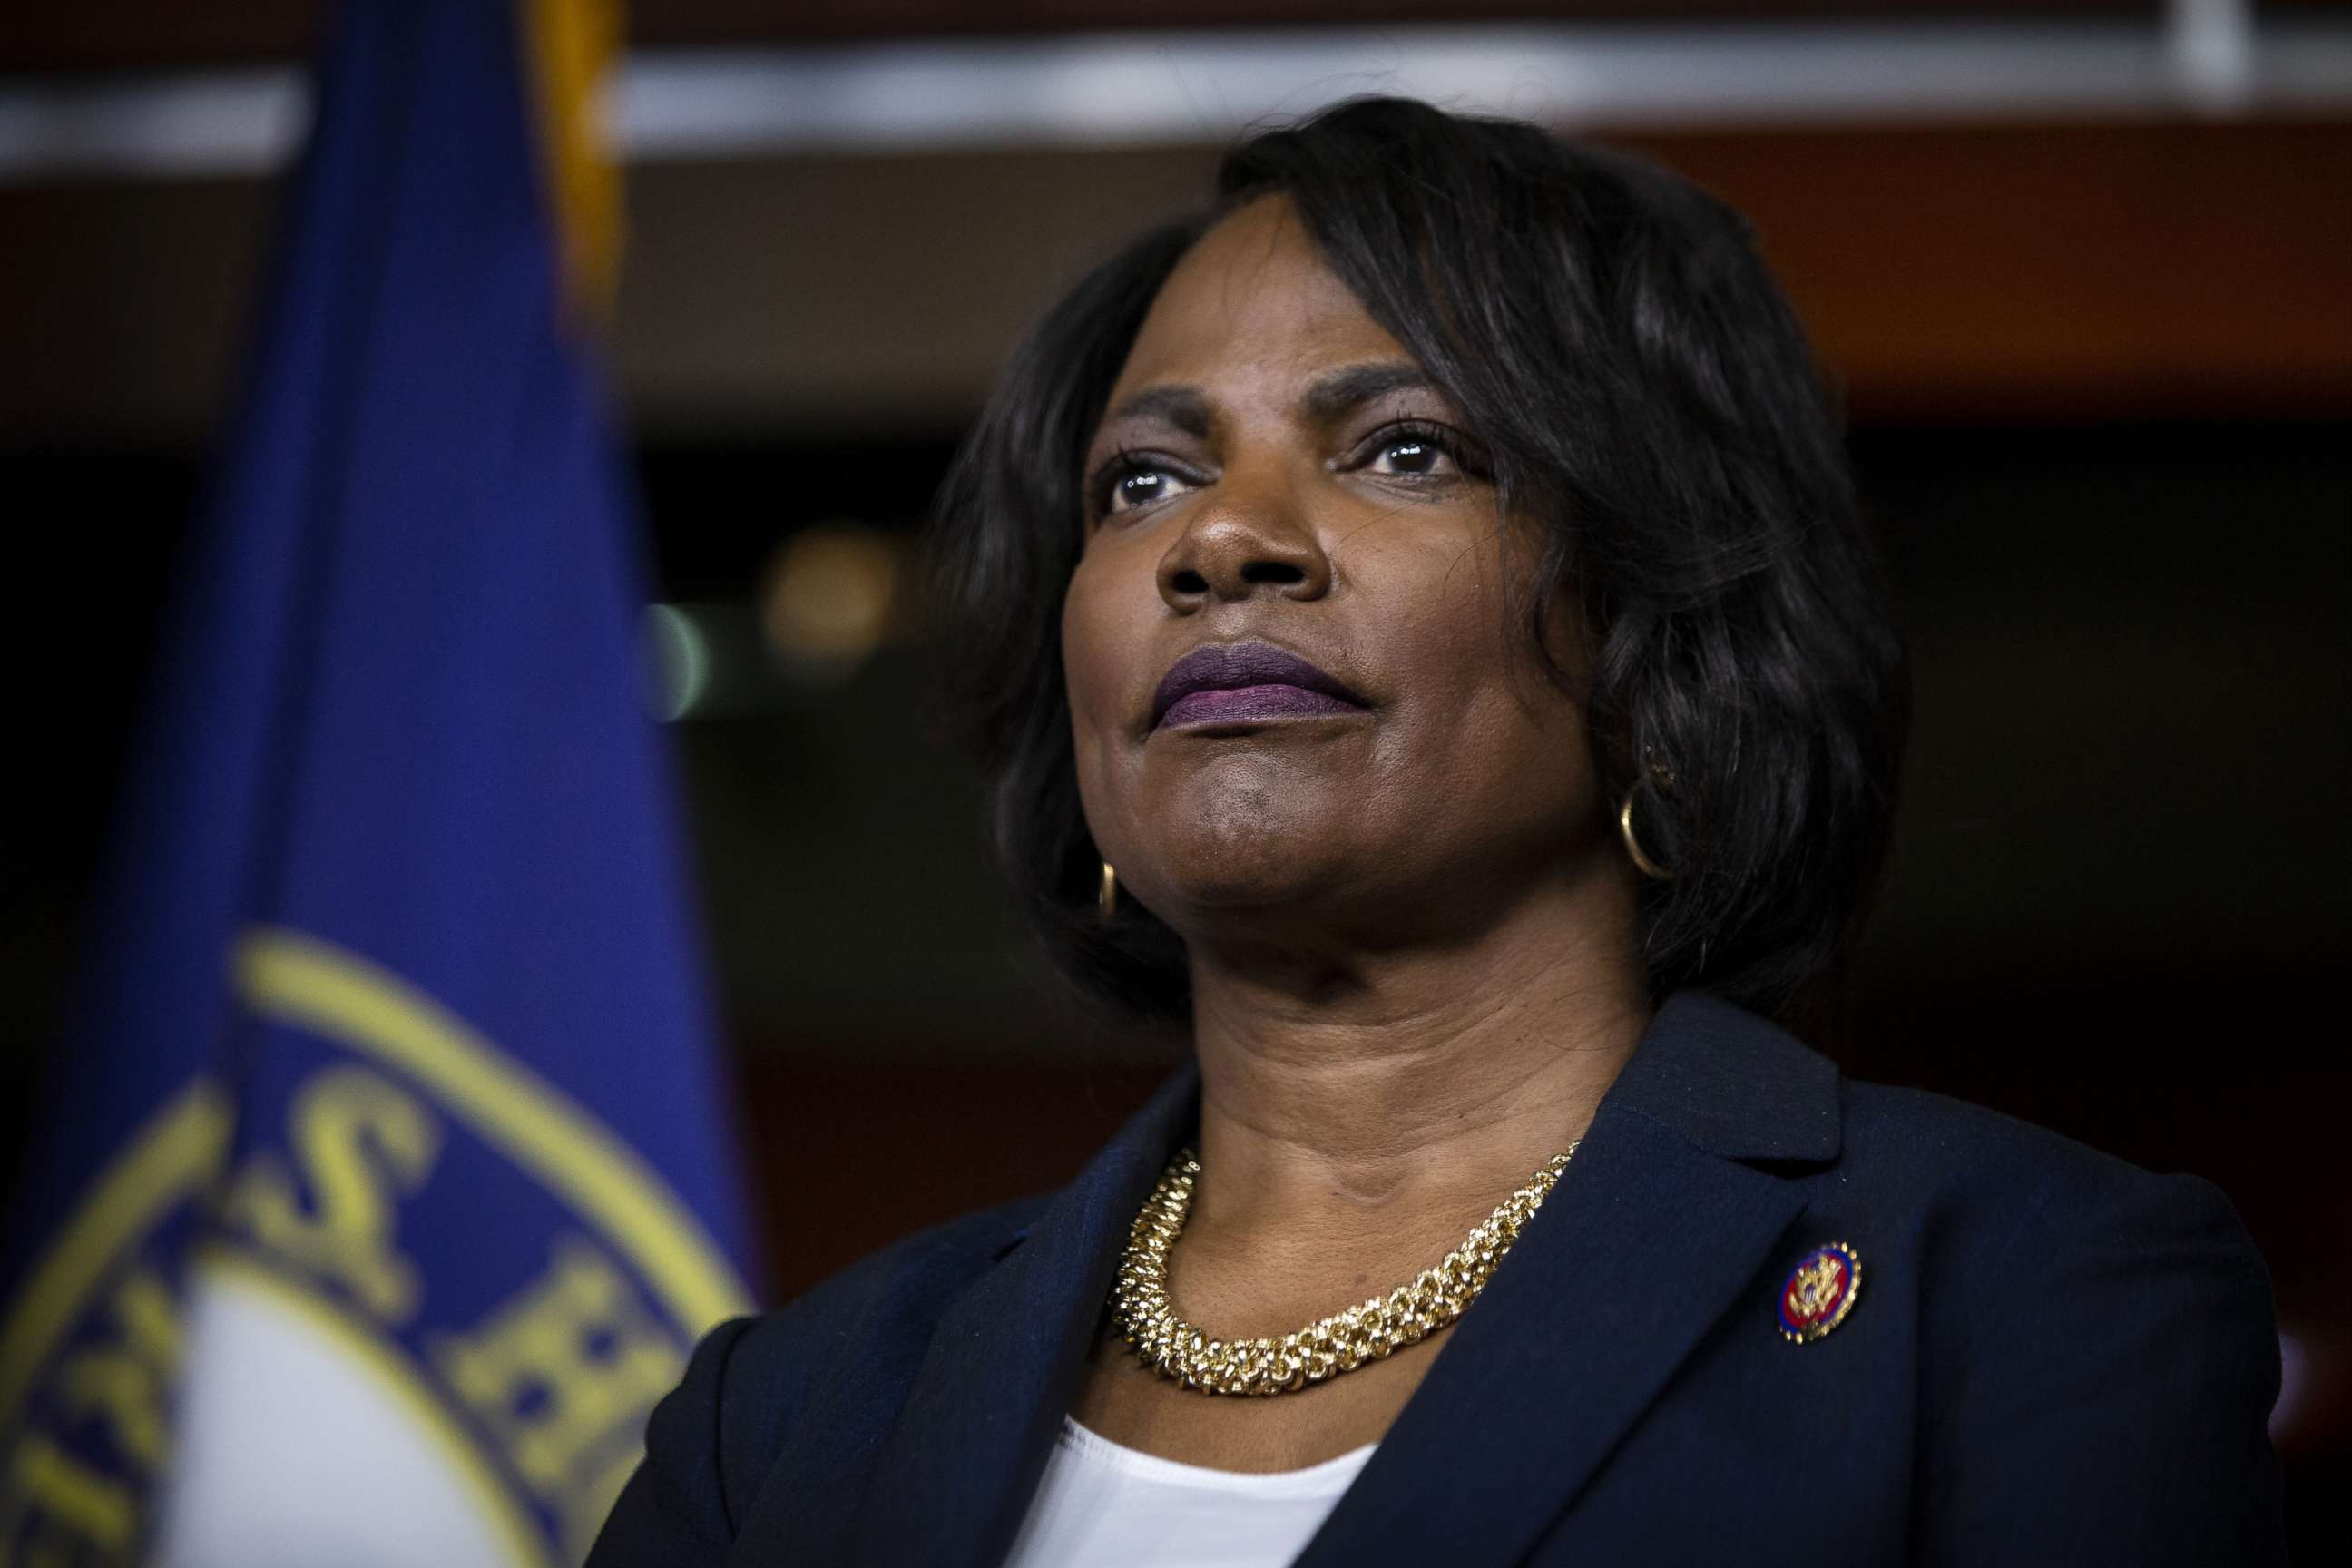 PHOTO: File photo of Rep. Val Demings  at a news conference on Capitol Hill in Washington on Jan. 15, 2020.